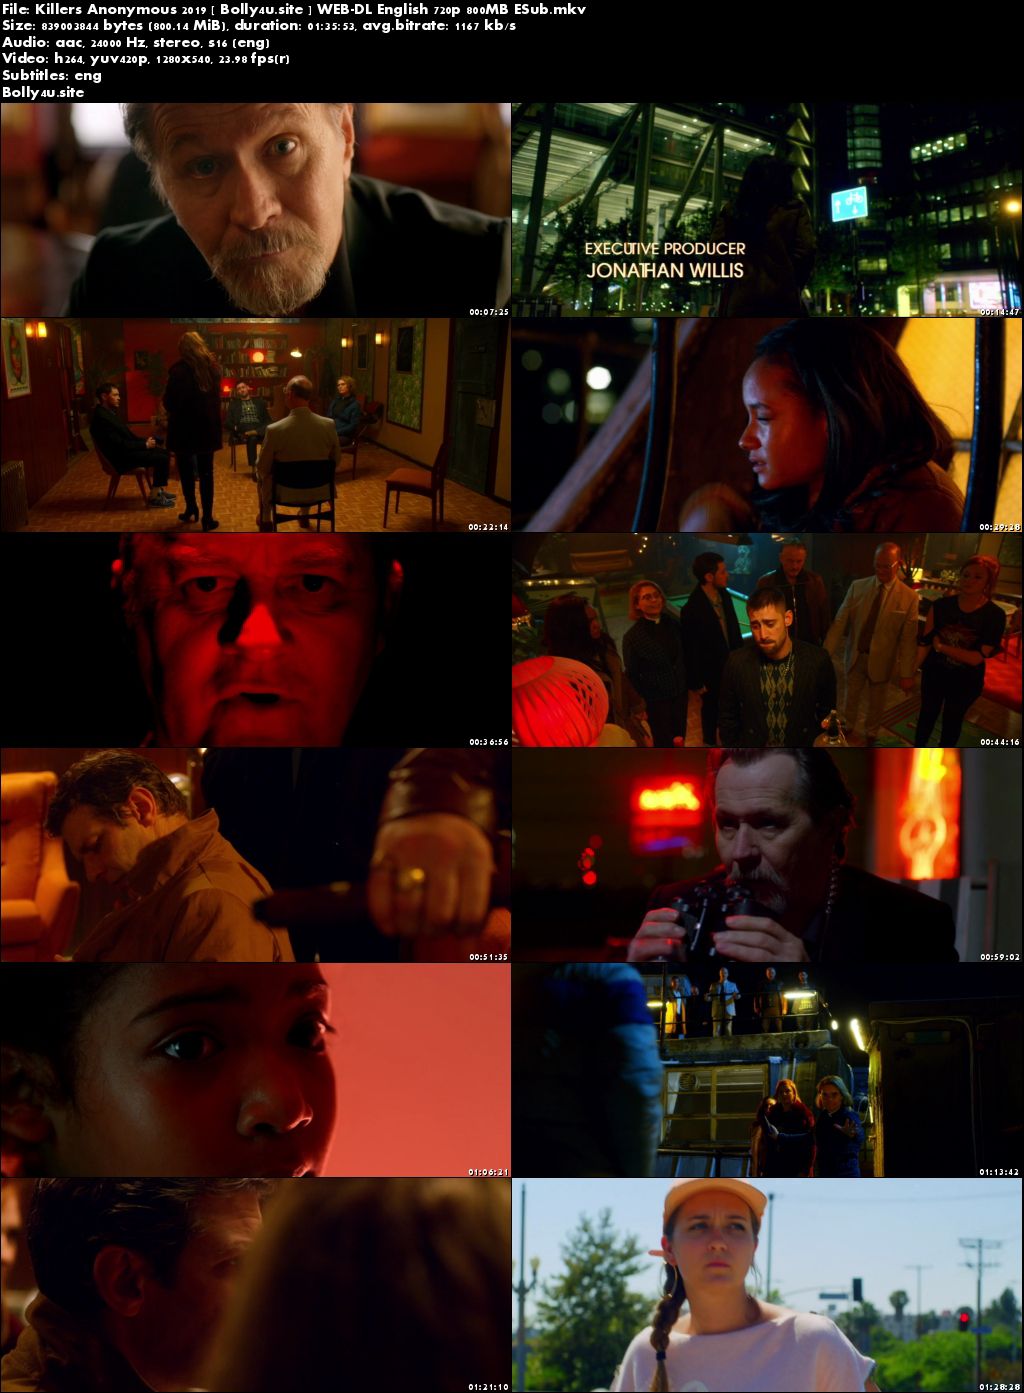 Killers Anonymous 2019 WEB-DL 800Mb English 720p ESub Download